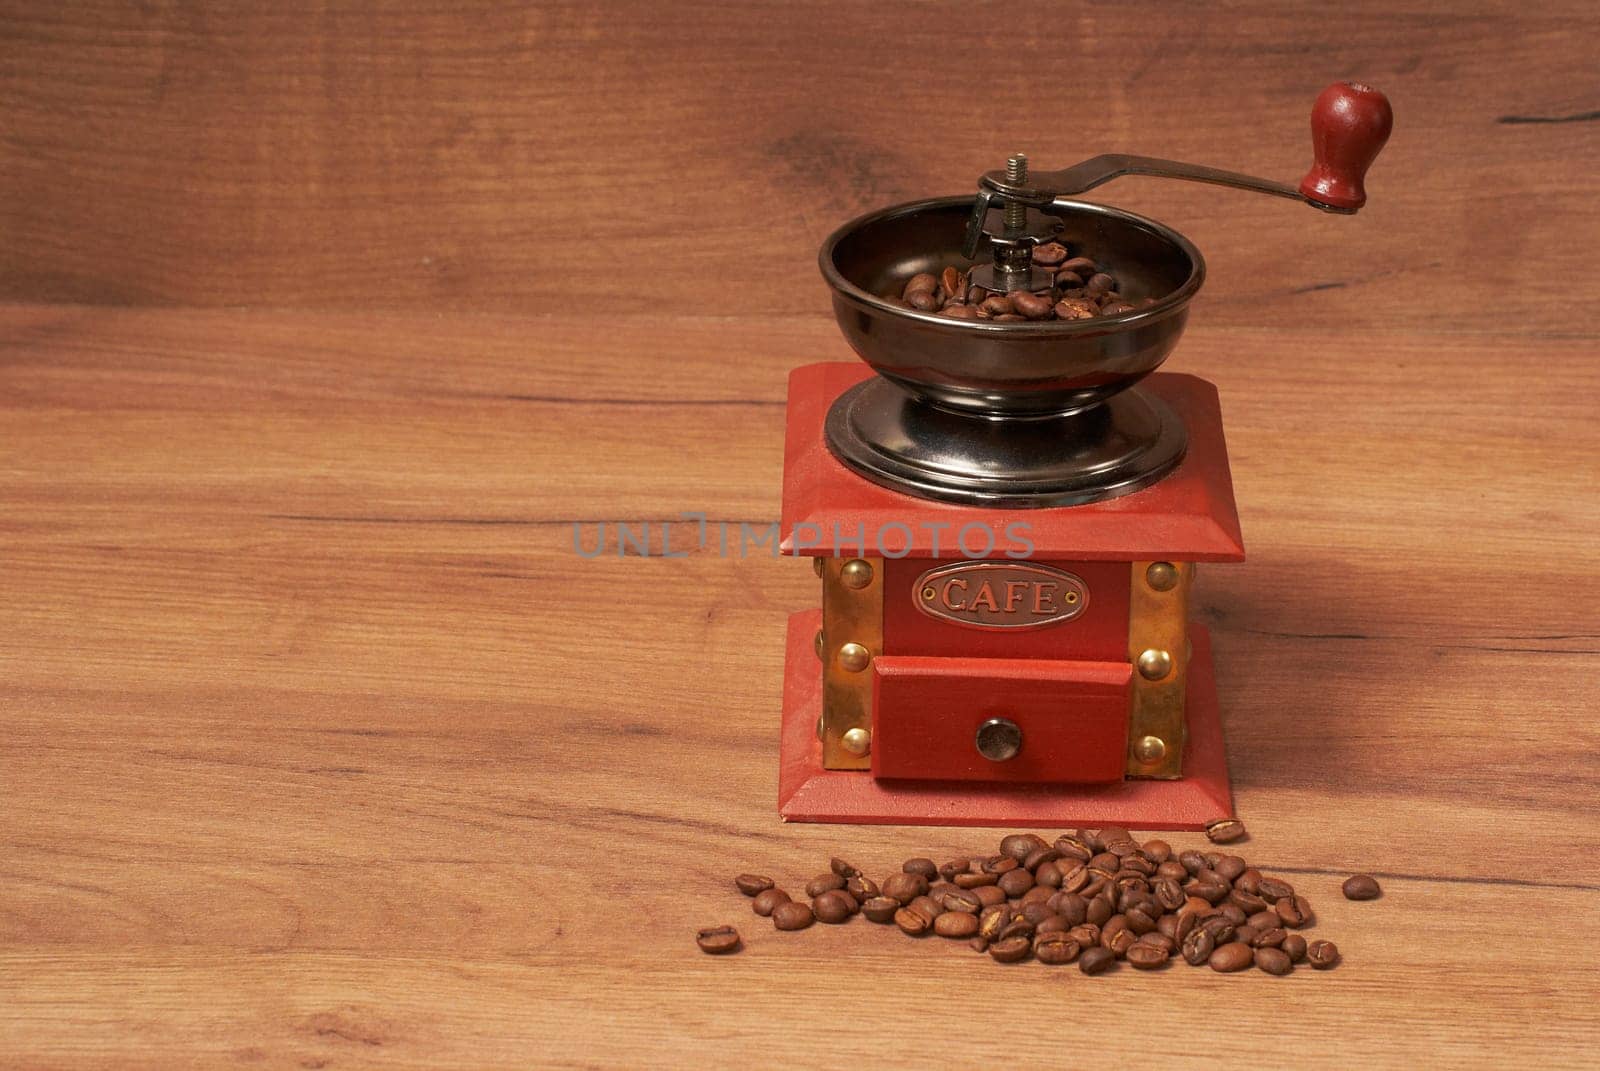 Manual coffee grinder for grinding coffee beans. Wooden background. vintage coffee grinder coffee beans